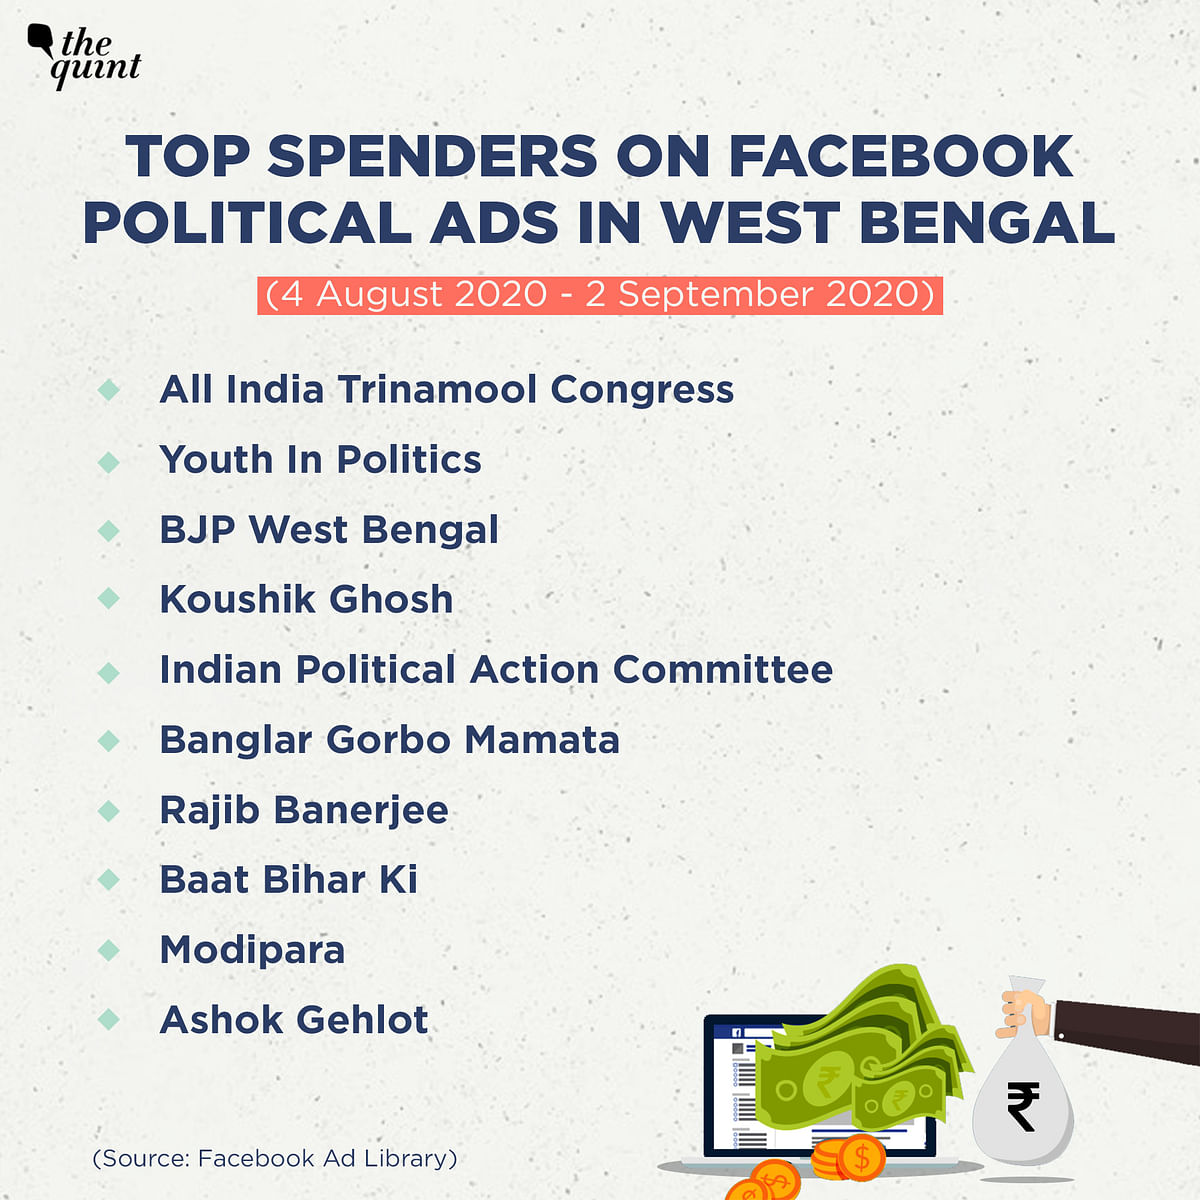 Of the 10 top spenders in West Bengal, 5 pages are run by I-PAC, while 2 others belong to TMC leaders.